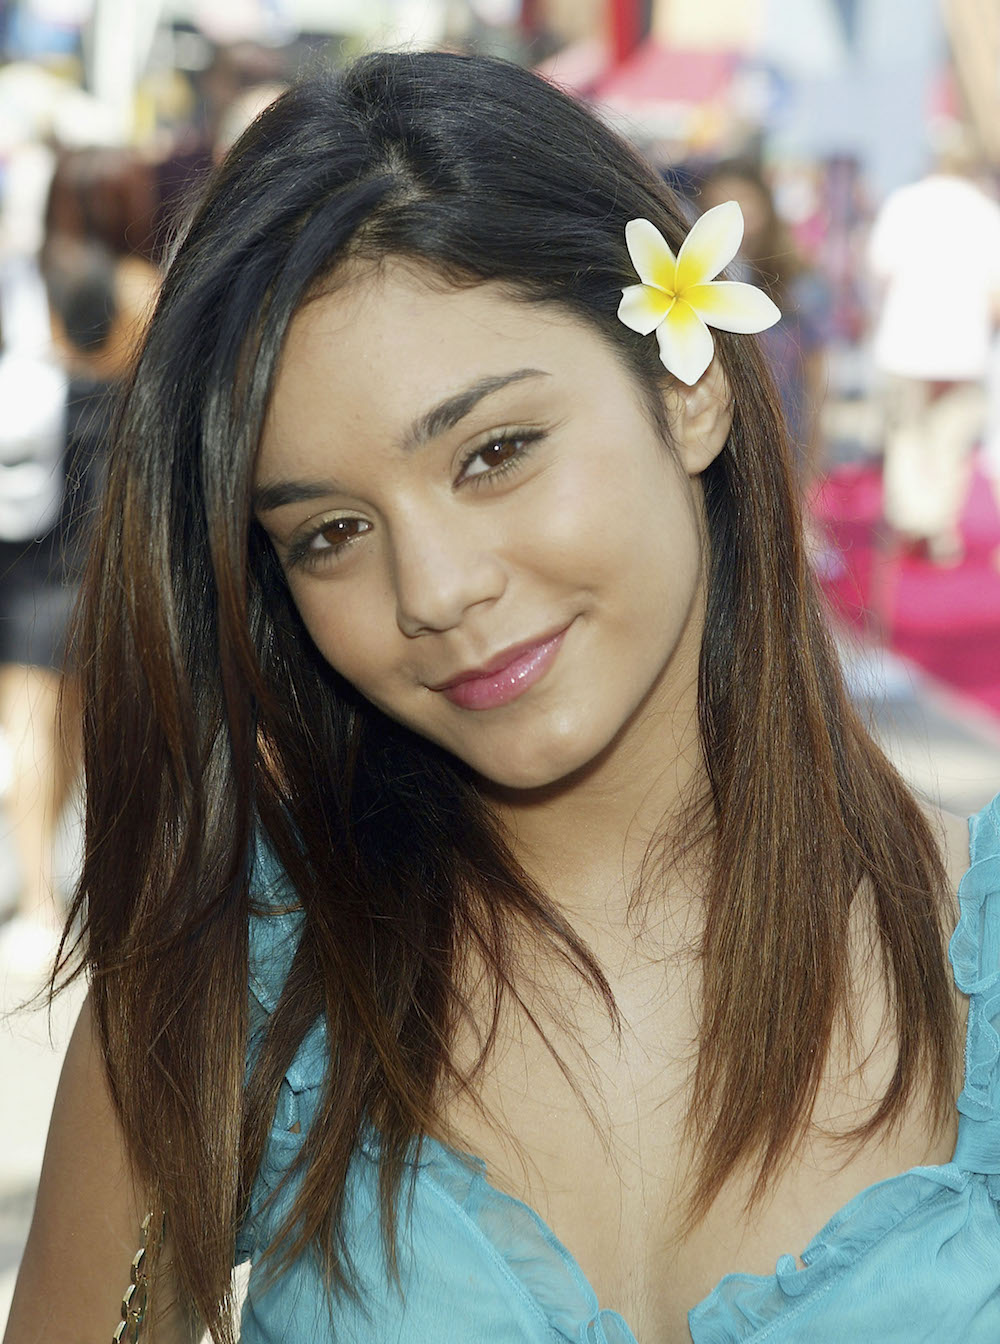 Vanessa Hudgens Beauty Evolution From Fresh-Faced to Dolled UpHelloGiggles